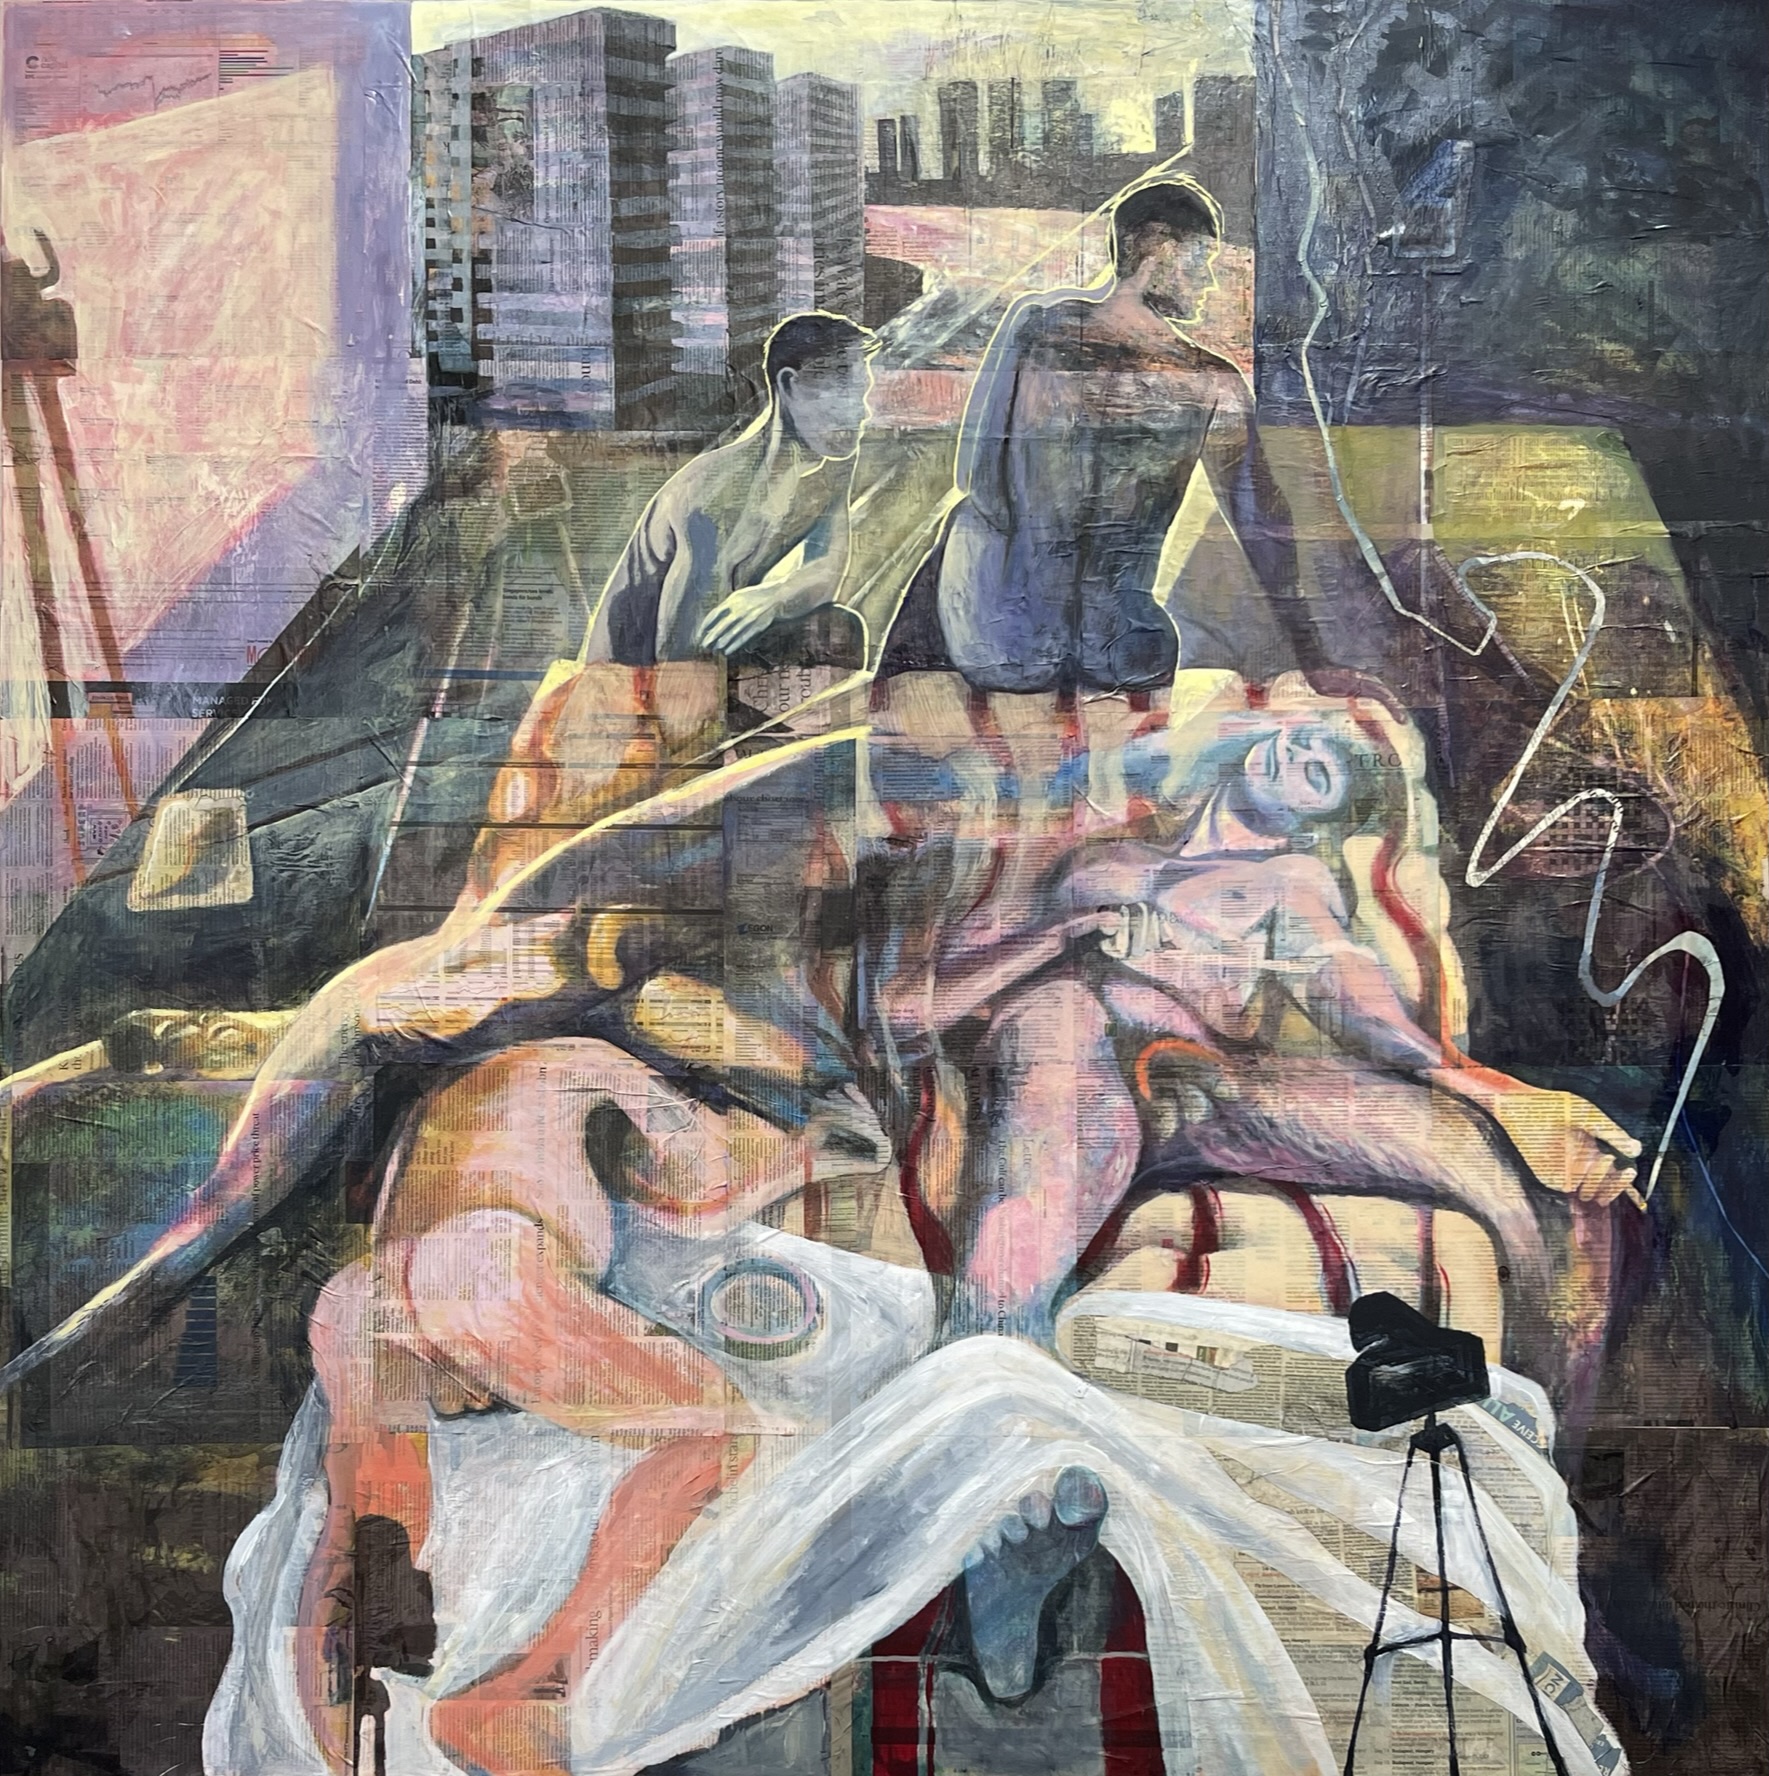 'Figures in a Room', James Dearlove, Acrylic and Oil on Paper and Linen, 150 x 150 cm